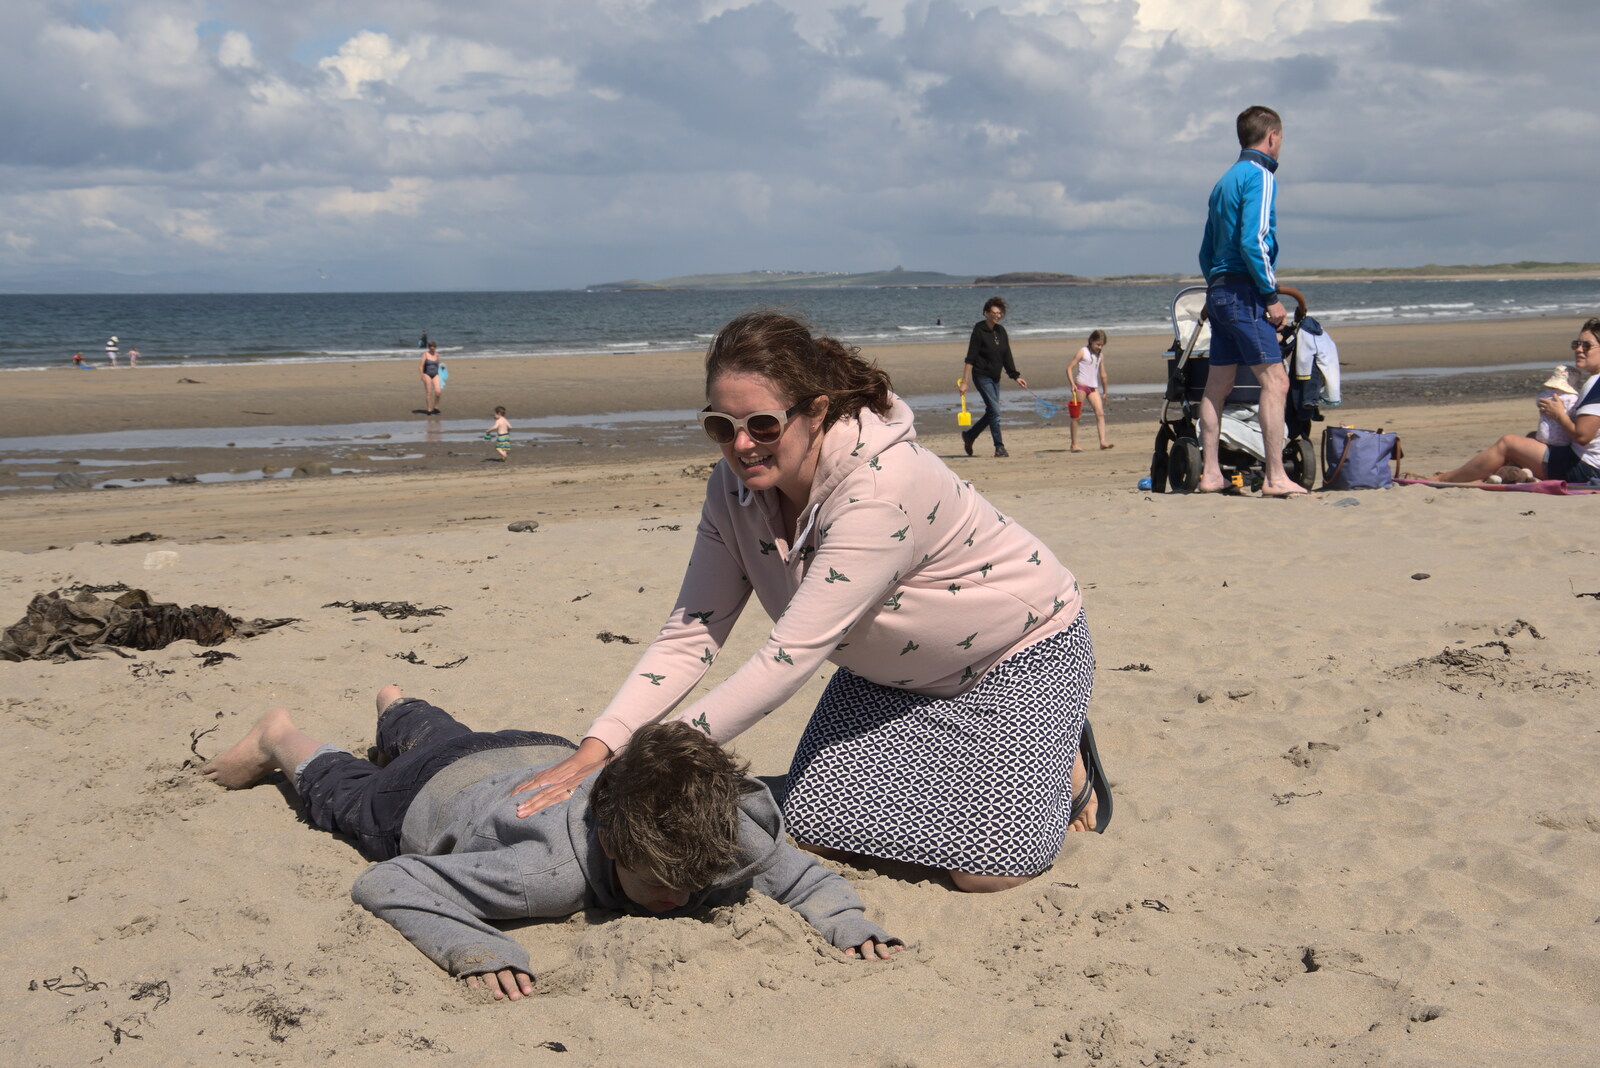 Pints of Guinness and Streedagh Beach, Grange and Sligo, Ireland - 9th August 2021: Fred gets a massage